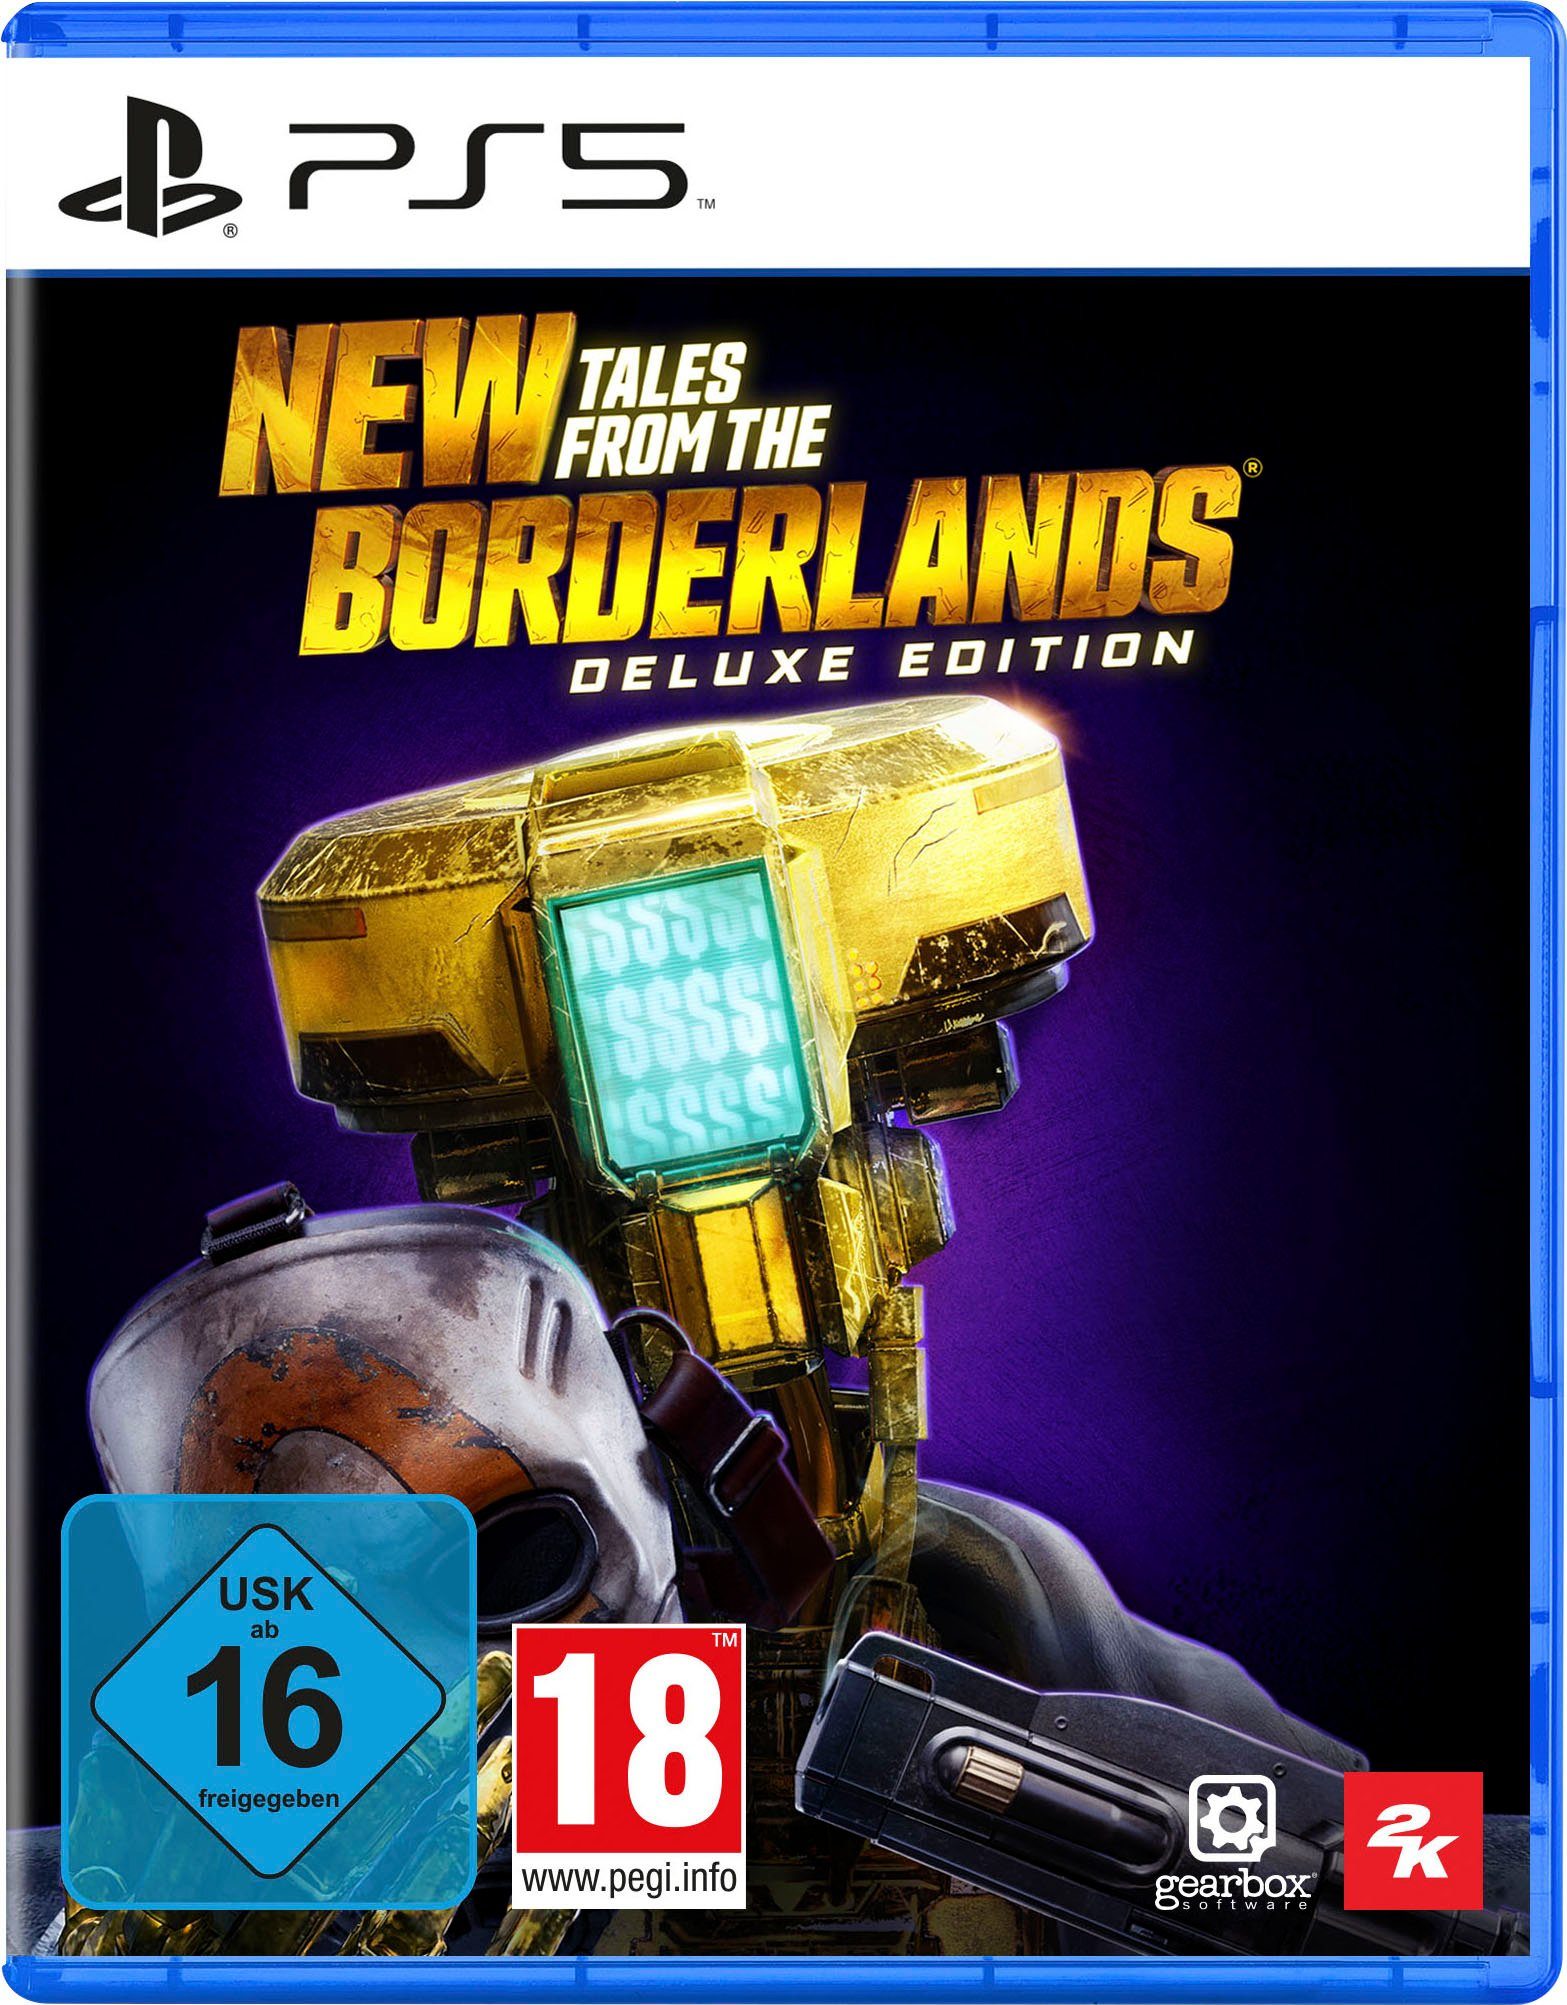 Deluxe PlayStation Borderlands the New Tales 2K 5 from